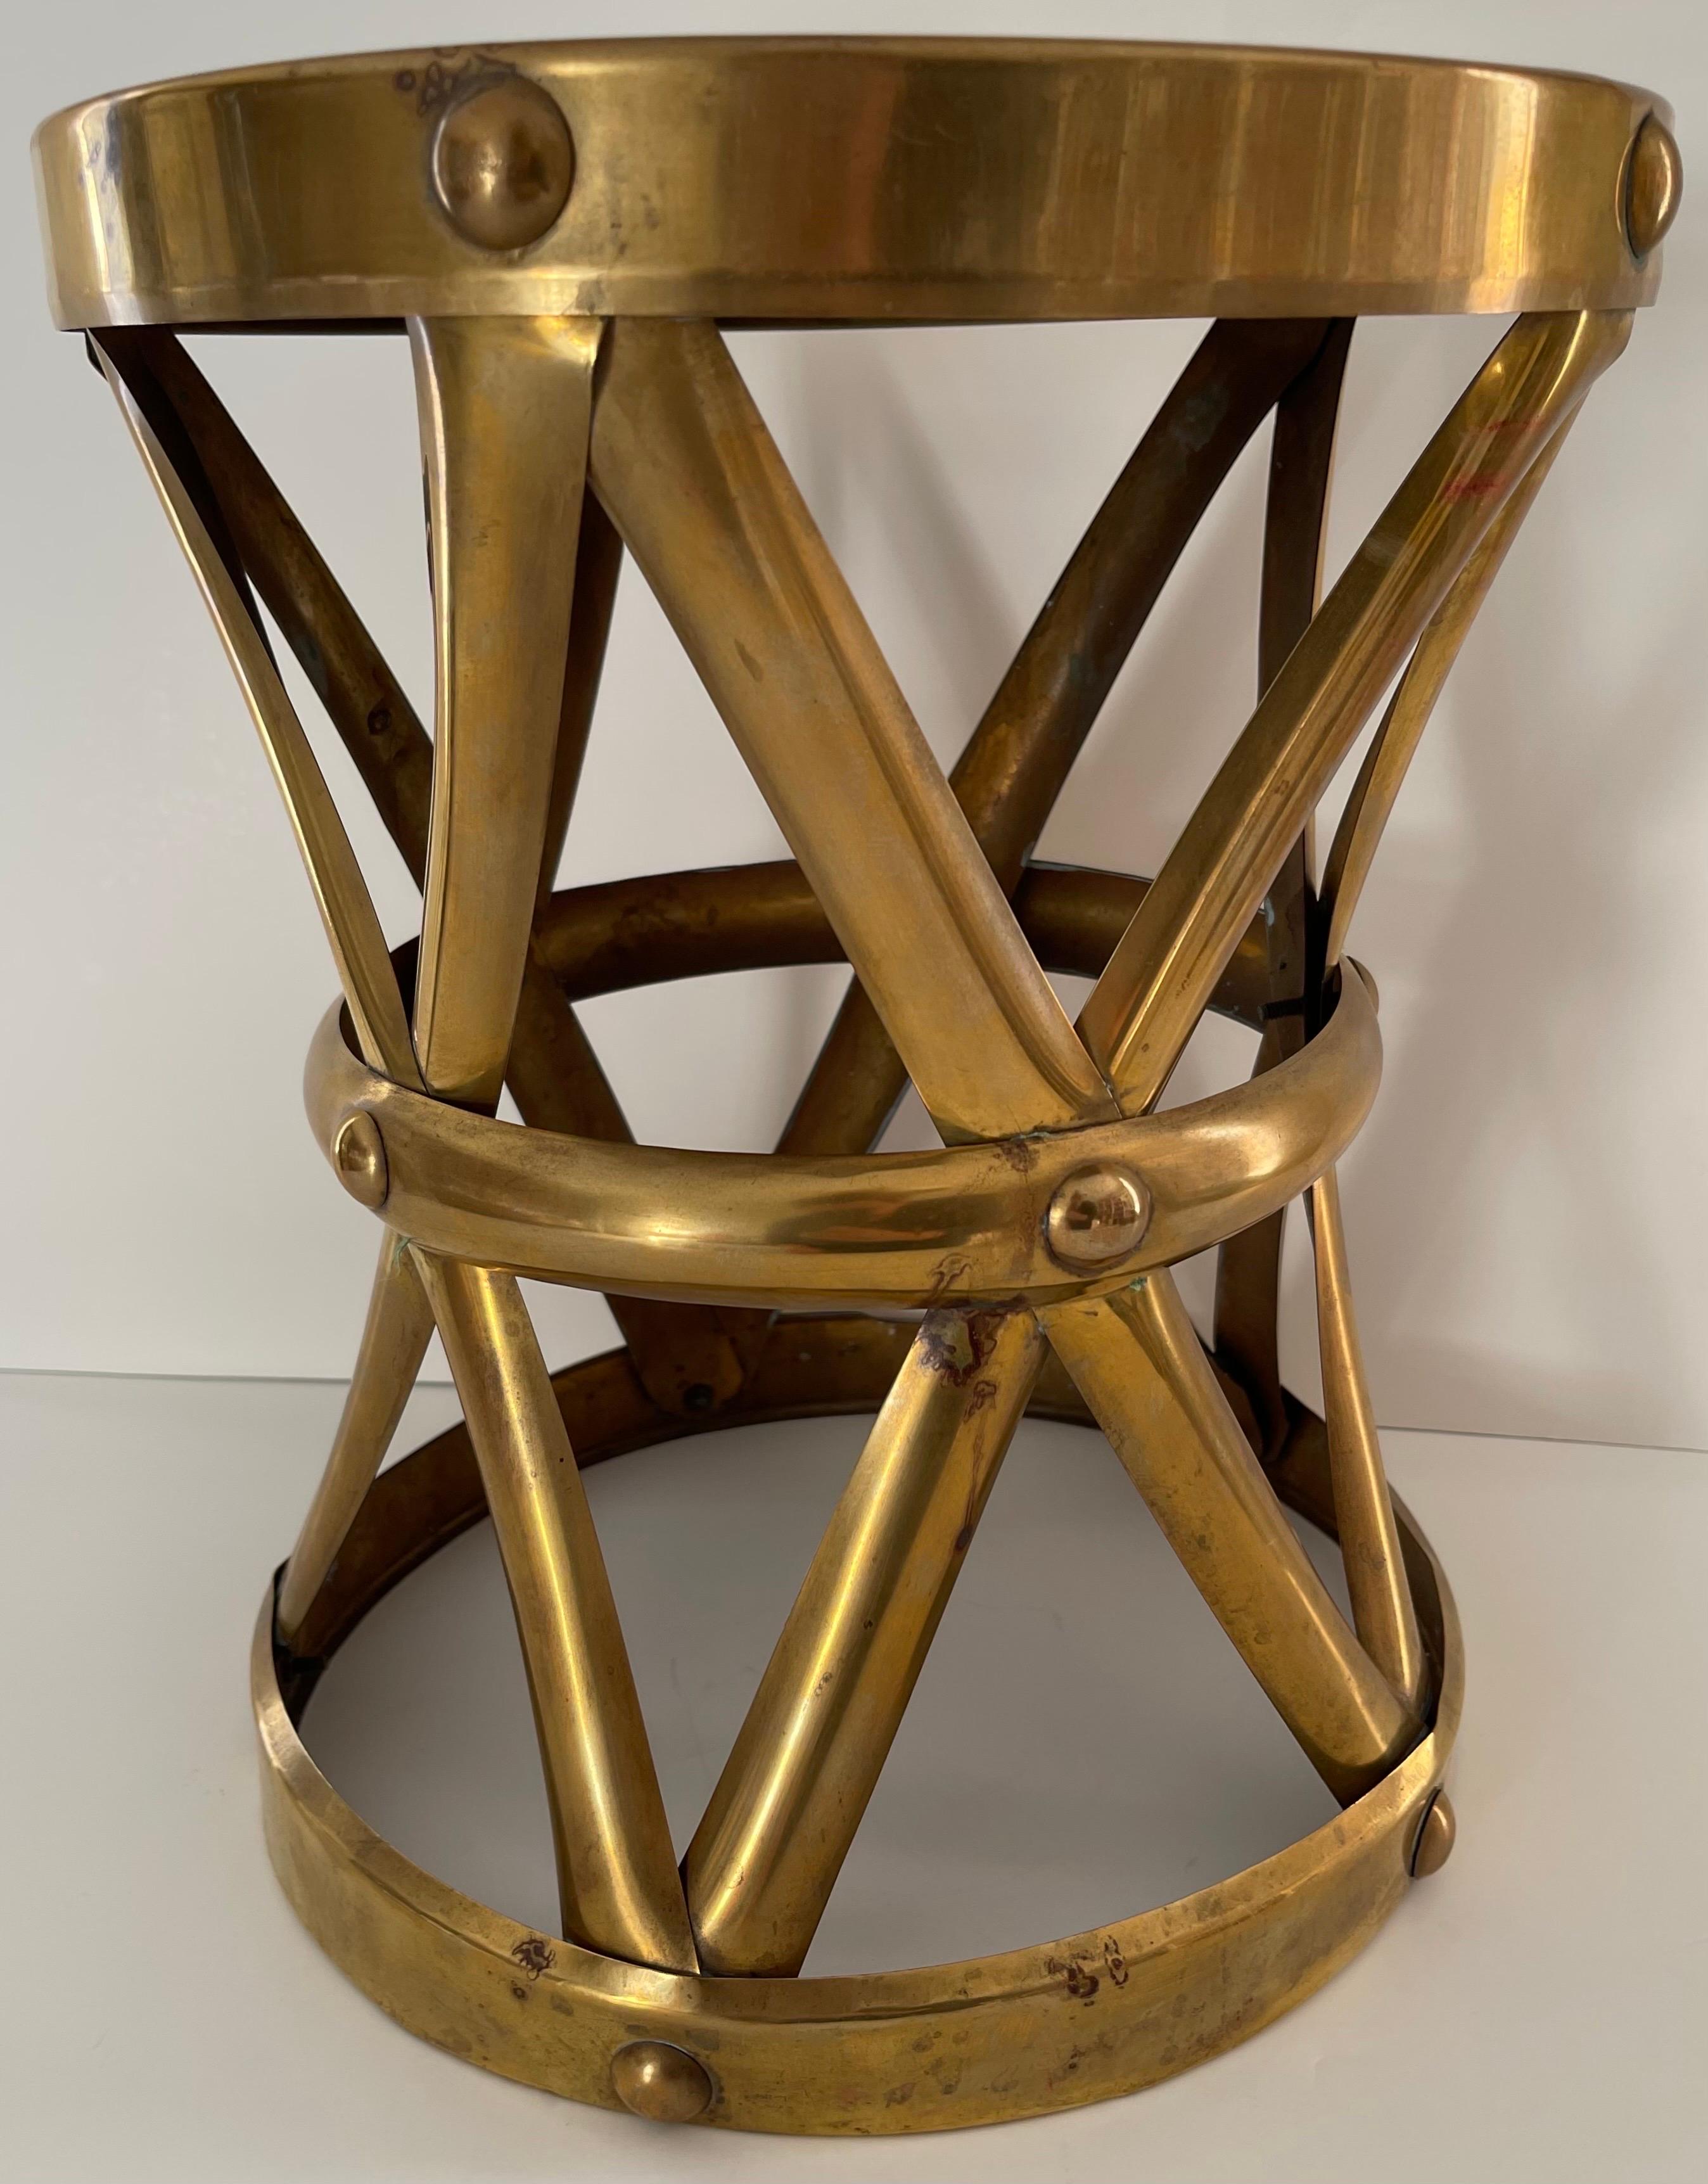 1970s Brass Tabouret Stool or Side Table In Good Condition For Sale In Stamford, CT